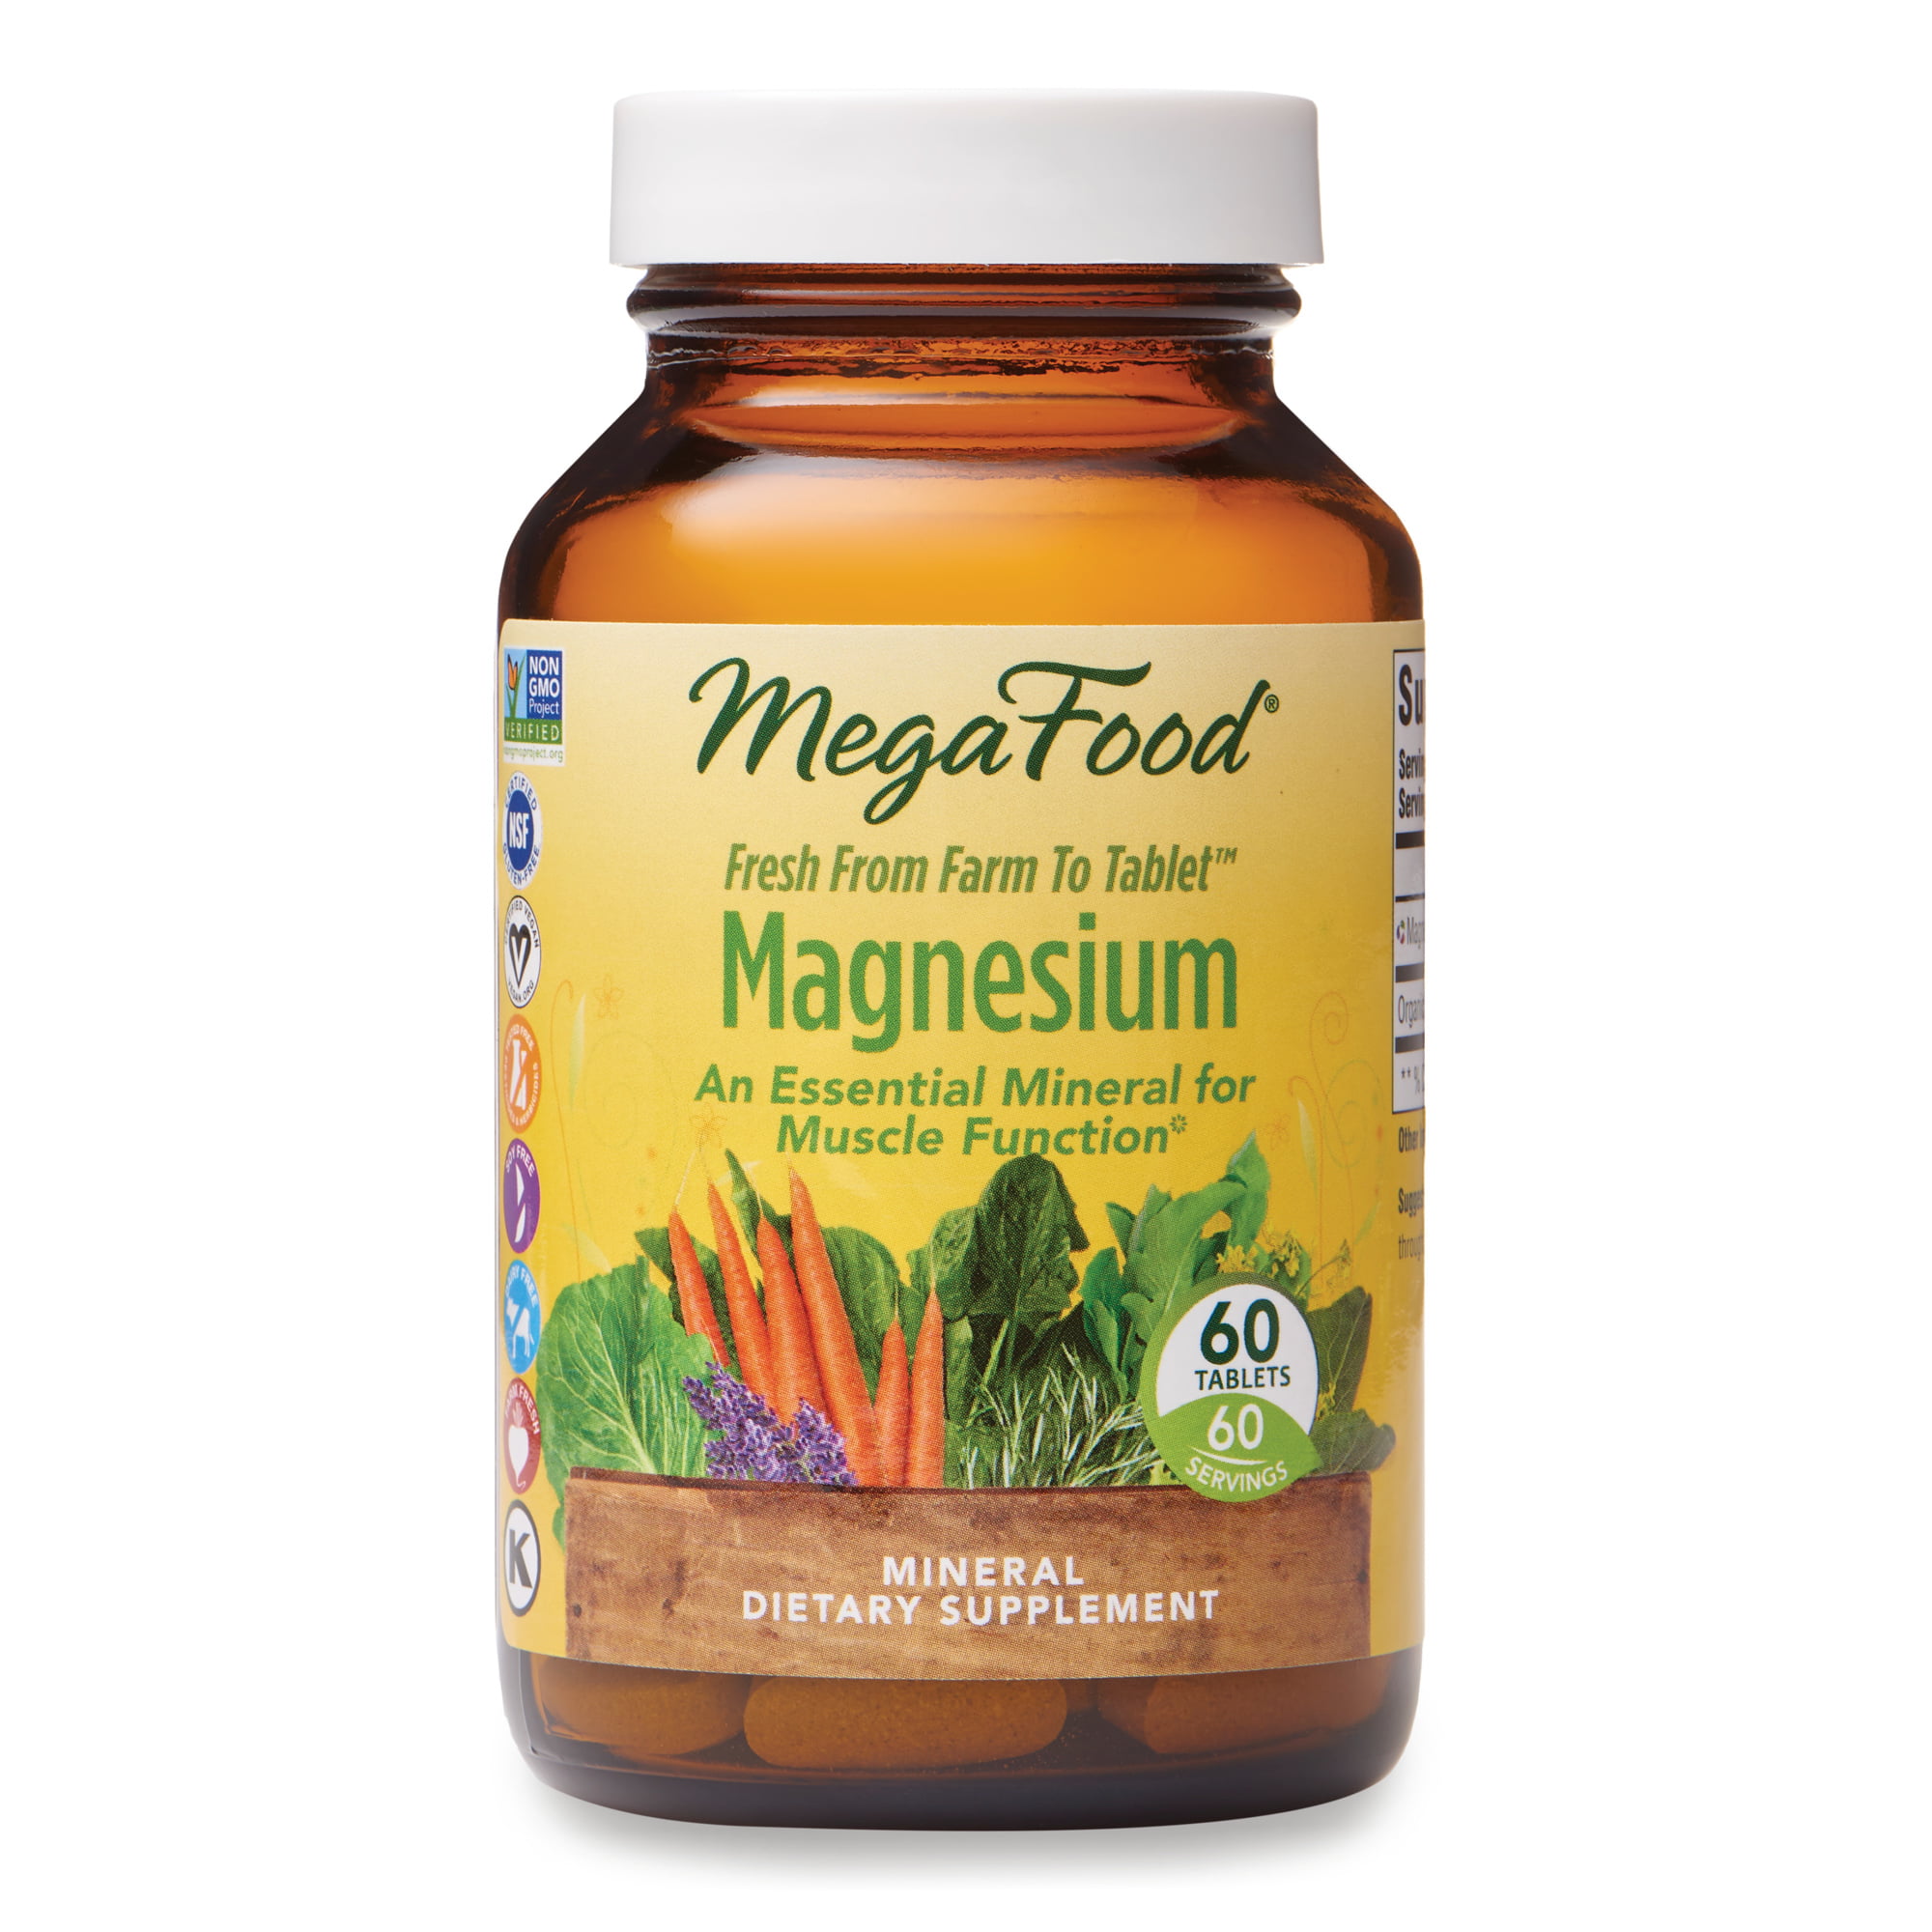 MegaFood Magnesium Helps Maintain Nerve and Muscle 